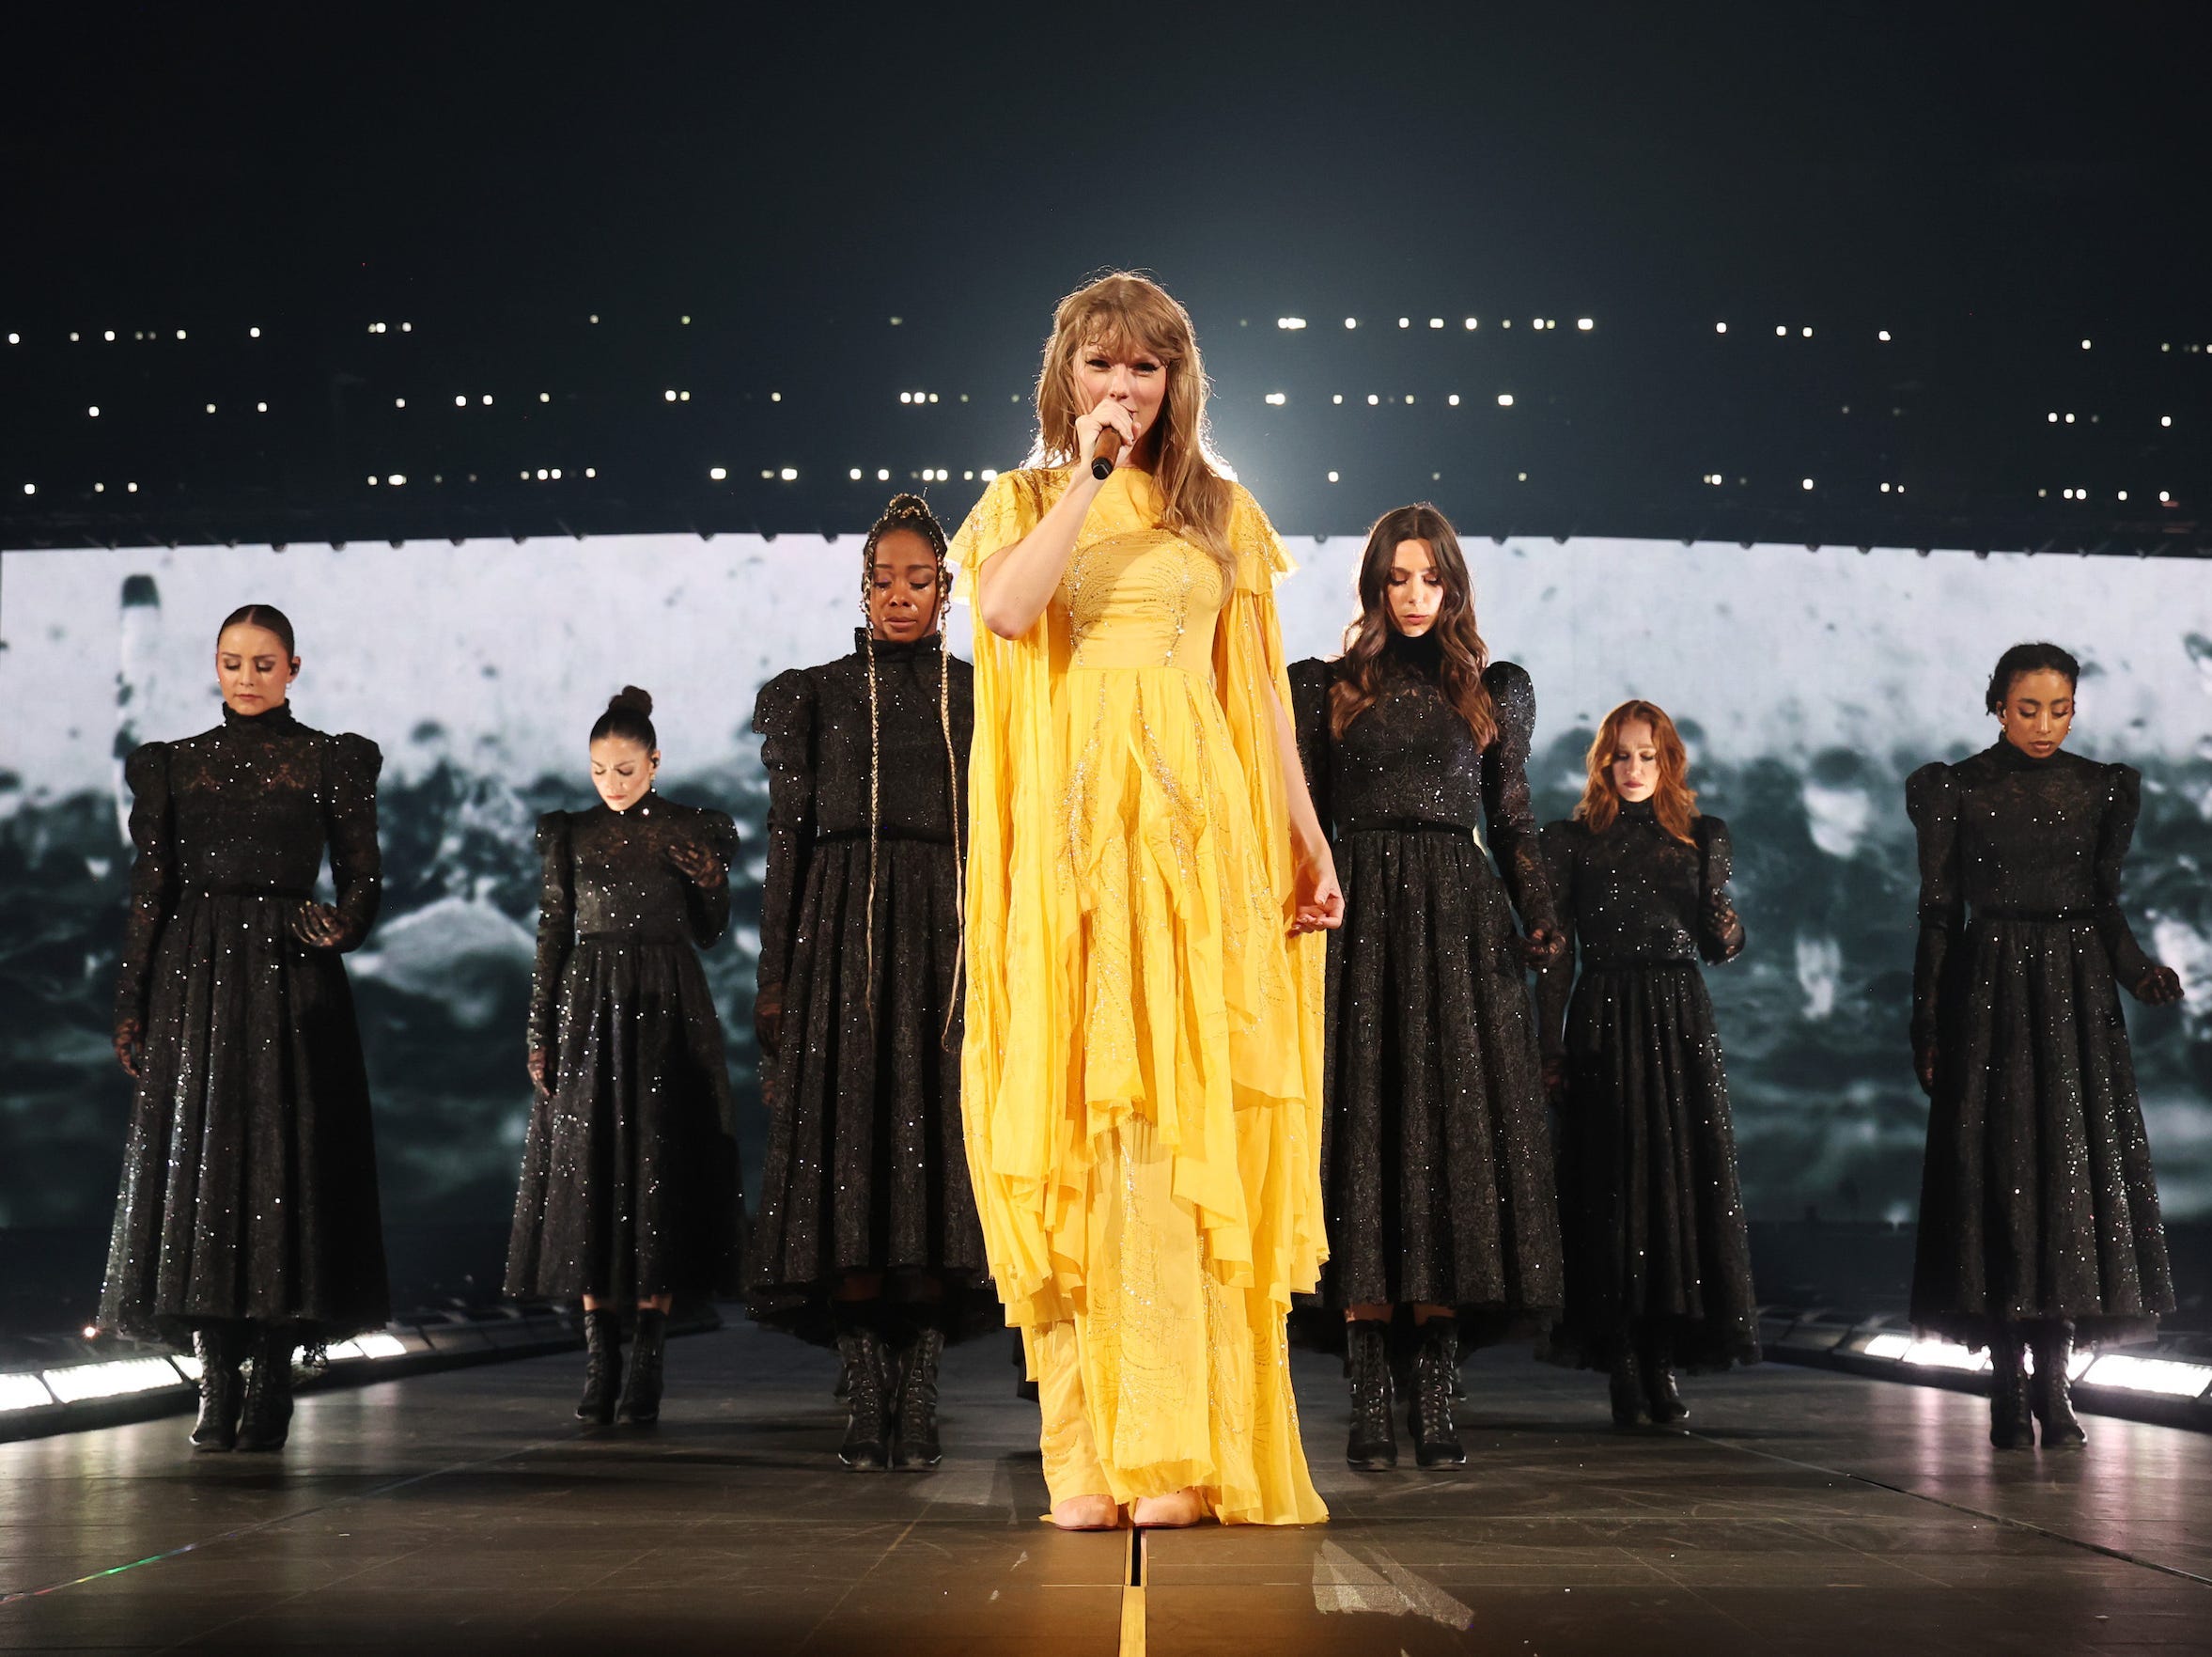 <p>The tiered and embroidered "<a href="https://www.businessinsider.com/taylor-swift-folklore-review-tracklist-breakdown-2020-7">Folklore</a>" outfits, custom-made by <a href="https://www.instagram.com/p/C6yaL_CMI0y/?hl=en&img_index=1" rel="noopener">Alberta Ferretti</a>, are almost always winners. The flowy style makes Swift look like a friendly witch, much like <a href="https://www.businessinsider.com/taylor-swift-features-songs-with-other-artists-2023-10">her recent collaborator Florence Welch</a>, which is a compliment.</p><p>However, this one doesn't suit the era's aesthetic one bit. The mismatch is especially glaring during "My Tears Ricochet," which is intended to resemble a funeral procession.</p><p>This dress was likely designed to evoke the fusion of "Folklore" and "Evermore" into one segment, which came with Swift's newly altered setlist for the European leg. But still, as we previously established, yellow is not Swift's color. It doesn't work.</p>